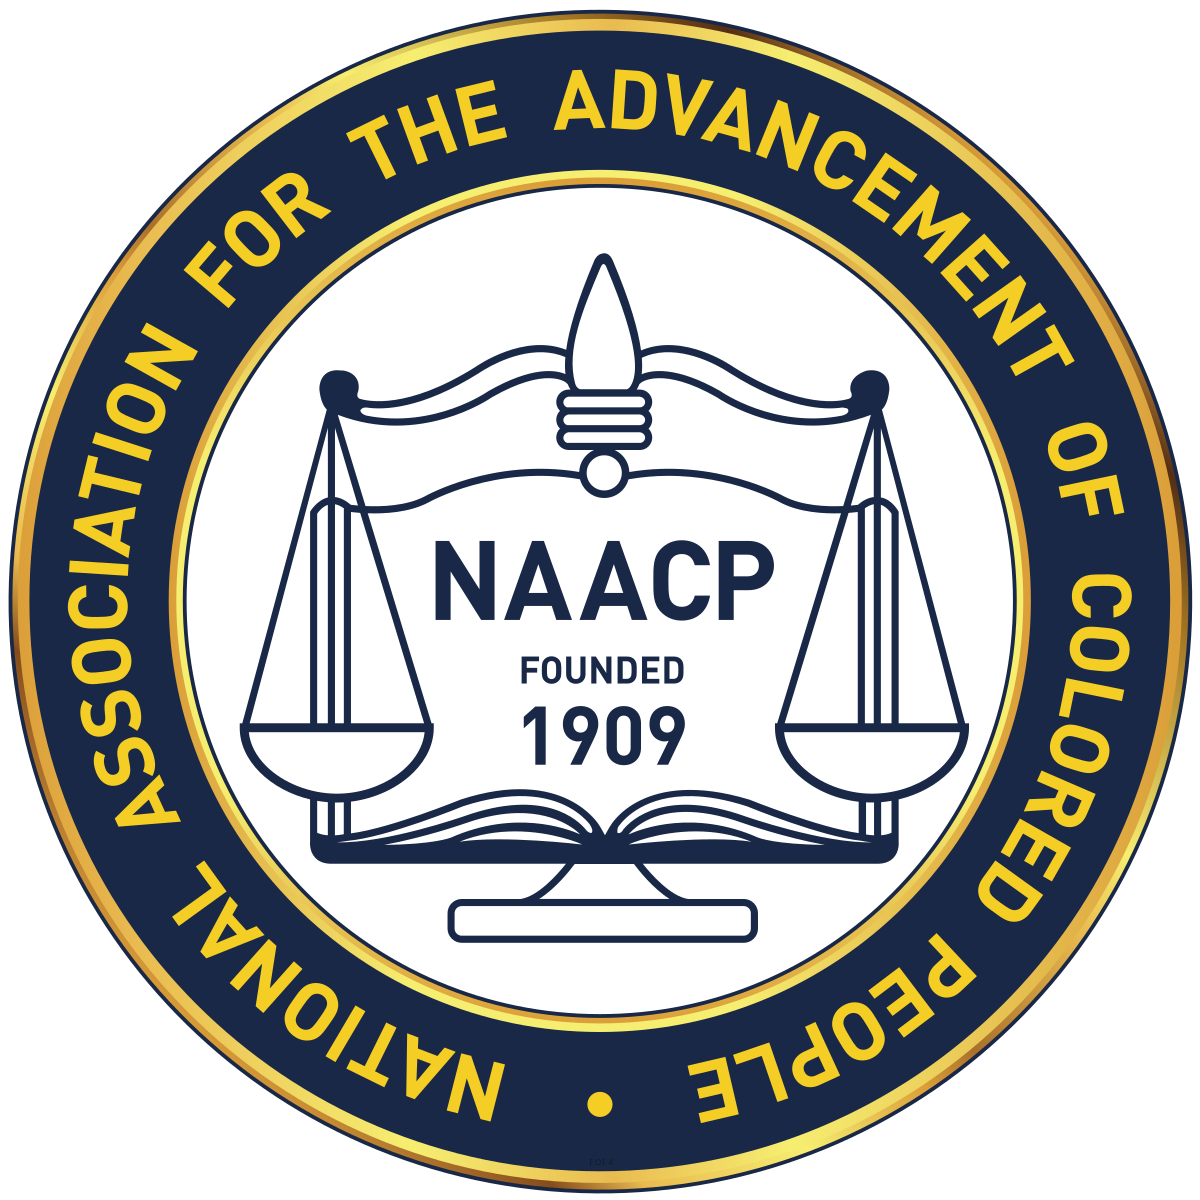 (BPRW) Bounce Partners With The NAACP To Live Stream Special NAACP